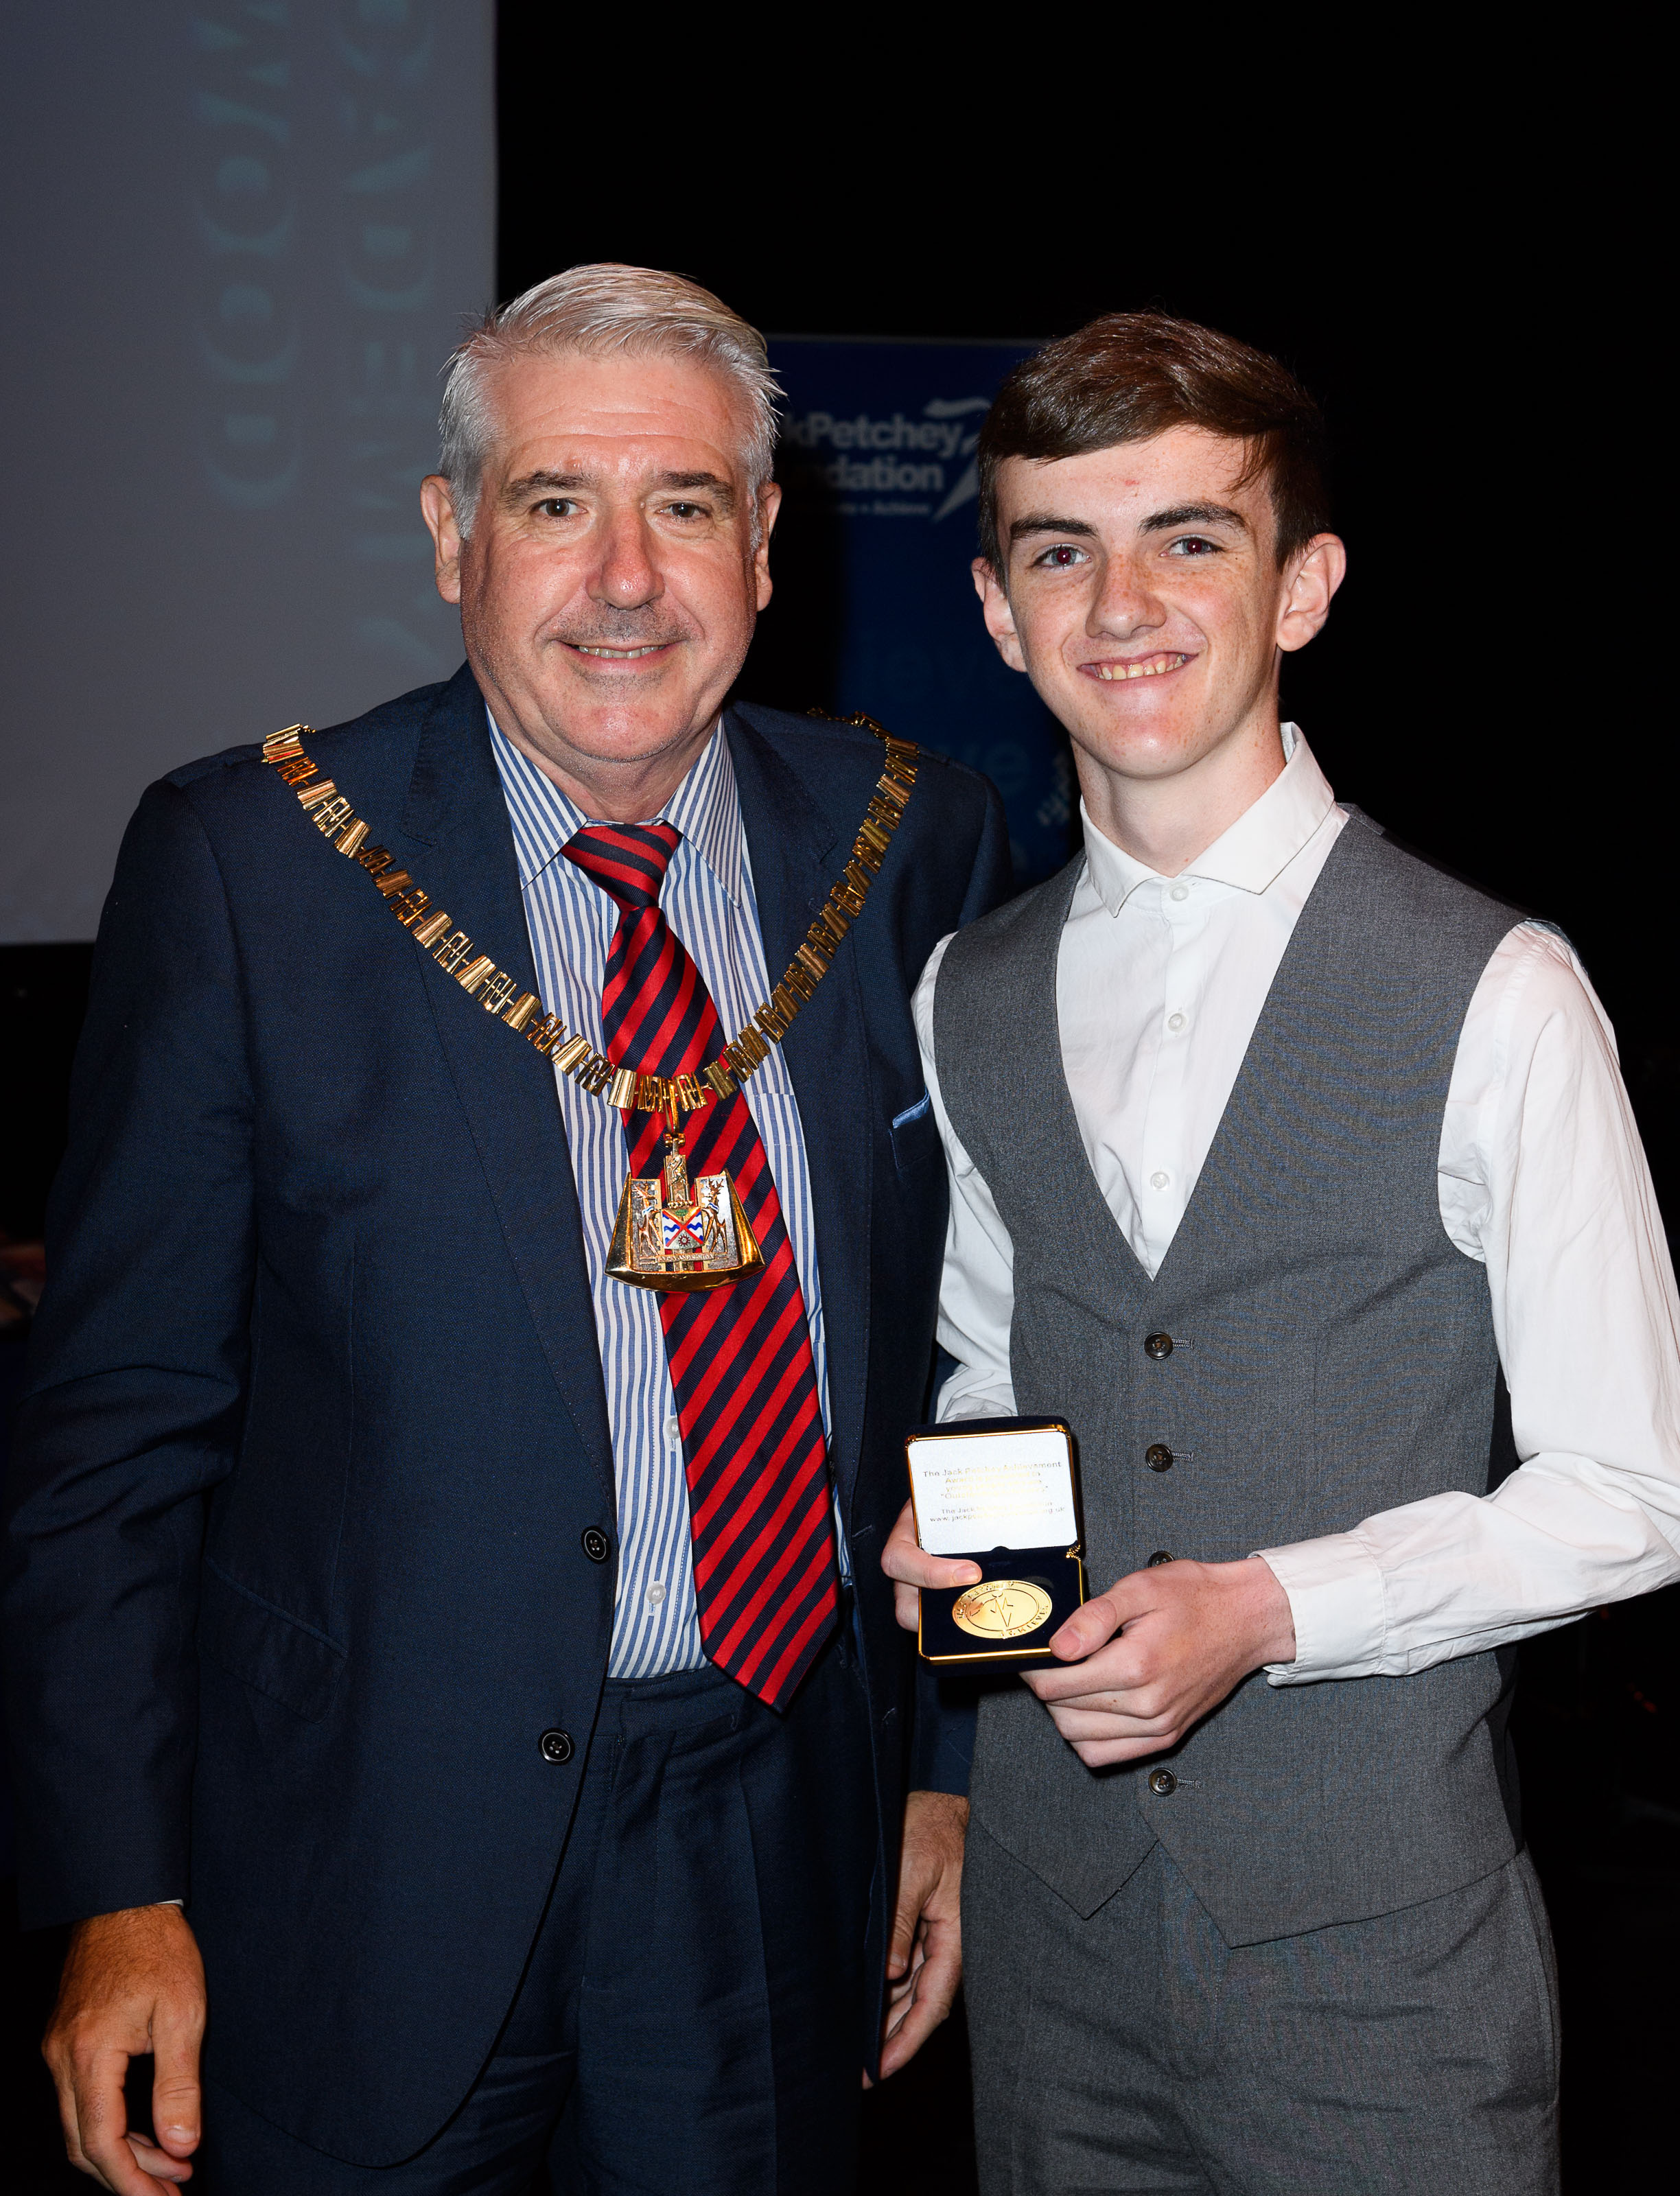 16-year-old recognised for raising over £300,000 for charity!